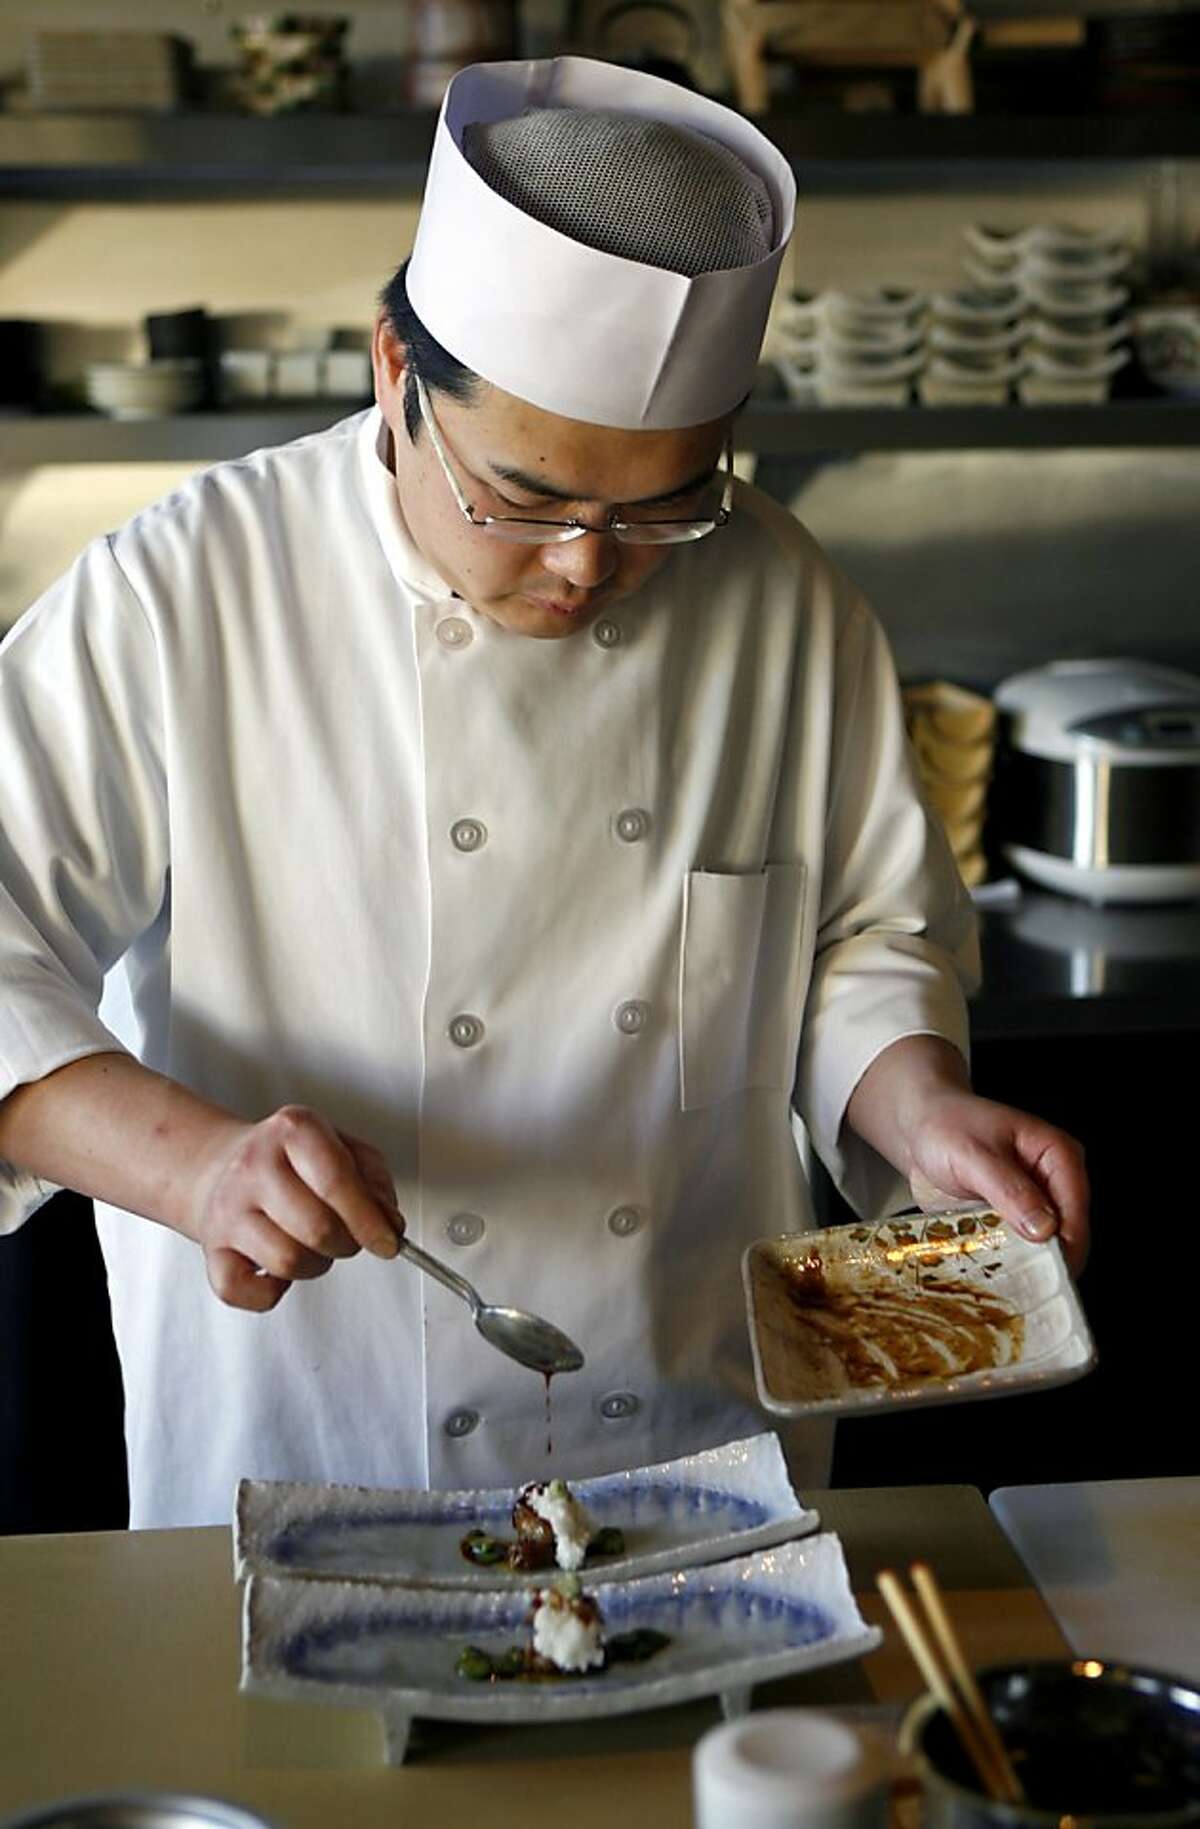 New caption:Chef and co-owner Katsuhiro Yamasaki prepares a dish at Wakuriya, a Japanese kaiseki restaurant, in San Mateo, Calif., on Thursday, May 7, 2009. Original caption: Chef and co-owner Katsuhiro Yamasaki adds the finishing touches to a foie gras dish at Wakuriya, a Japanese kaiseki restaurant, in San Mateo, Calif., on Thursday, May 7, 2009.